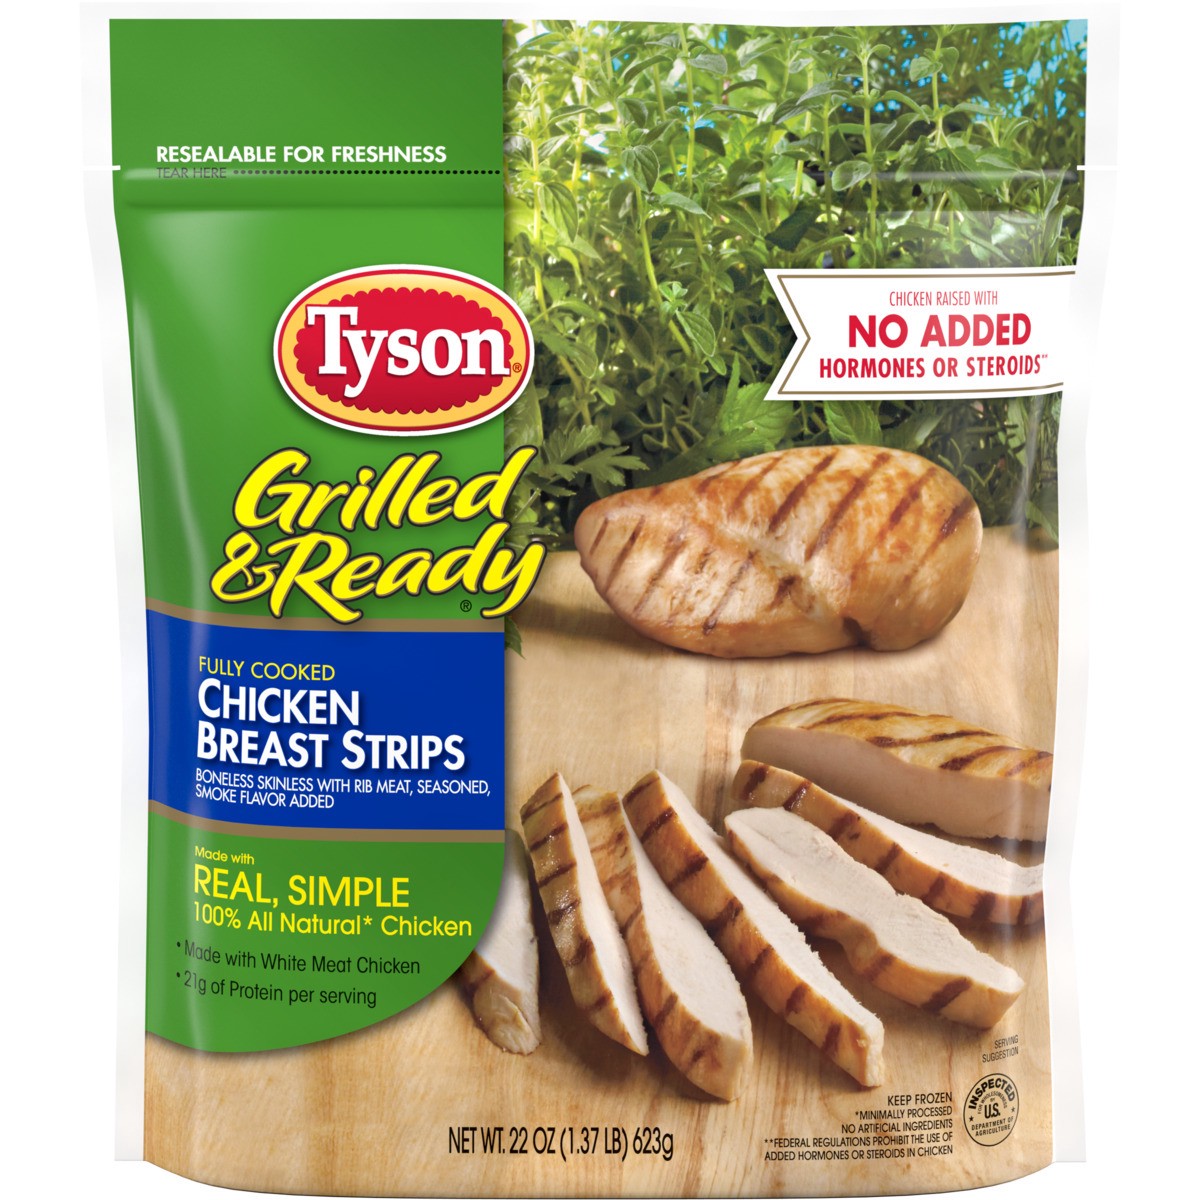 slide 8 of 10, TYSON GRILLED AND READY Tyson Grilled & Ready Fully Cooked Grilled Chicken Breast Strips, 22 oz. (Frozen), 623.69 g